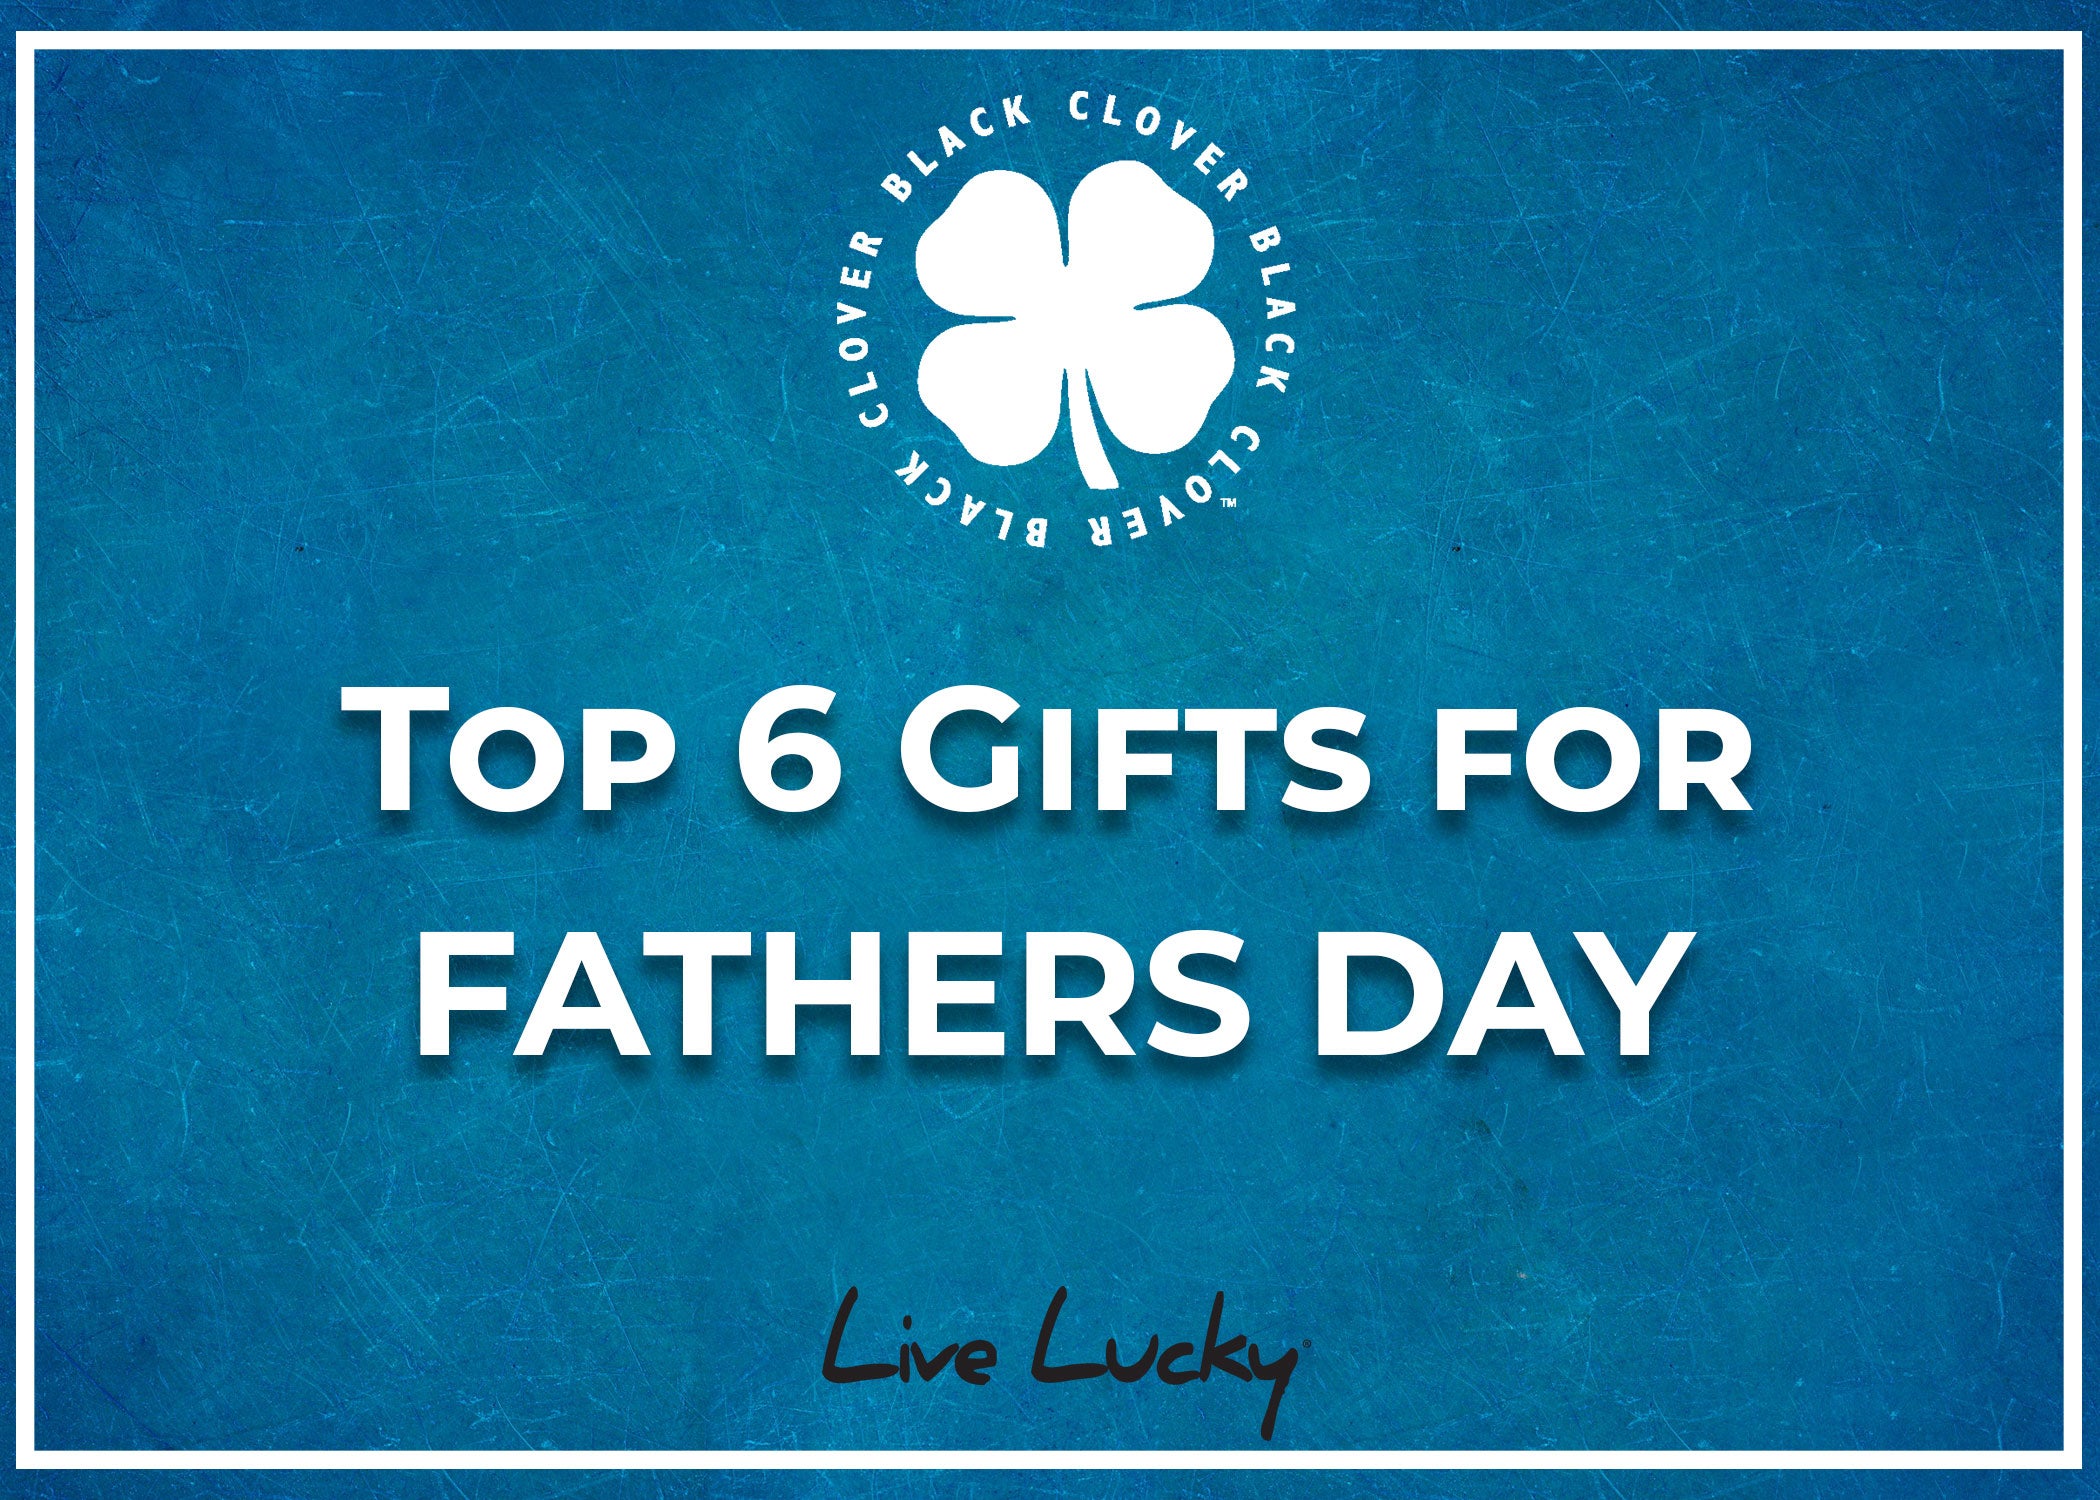 Top 6 Gifts For Father's Day